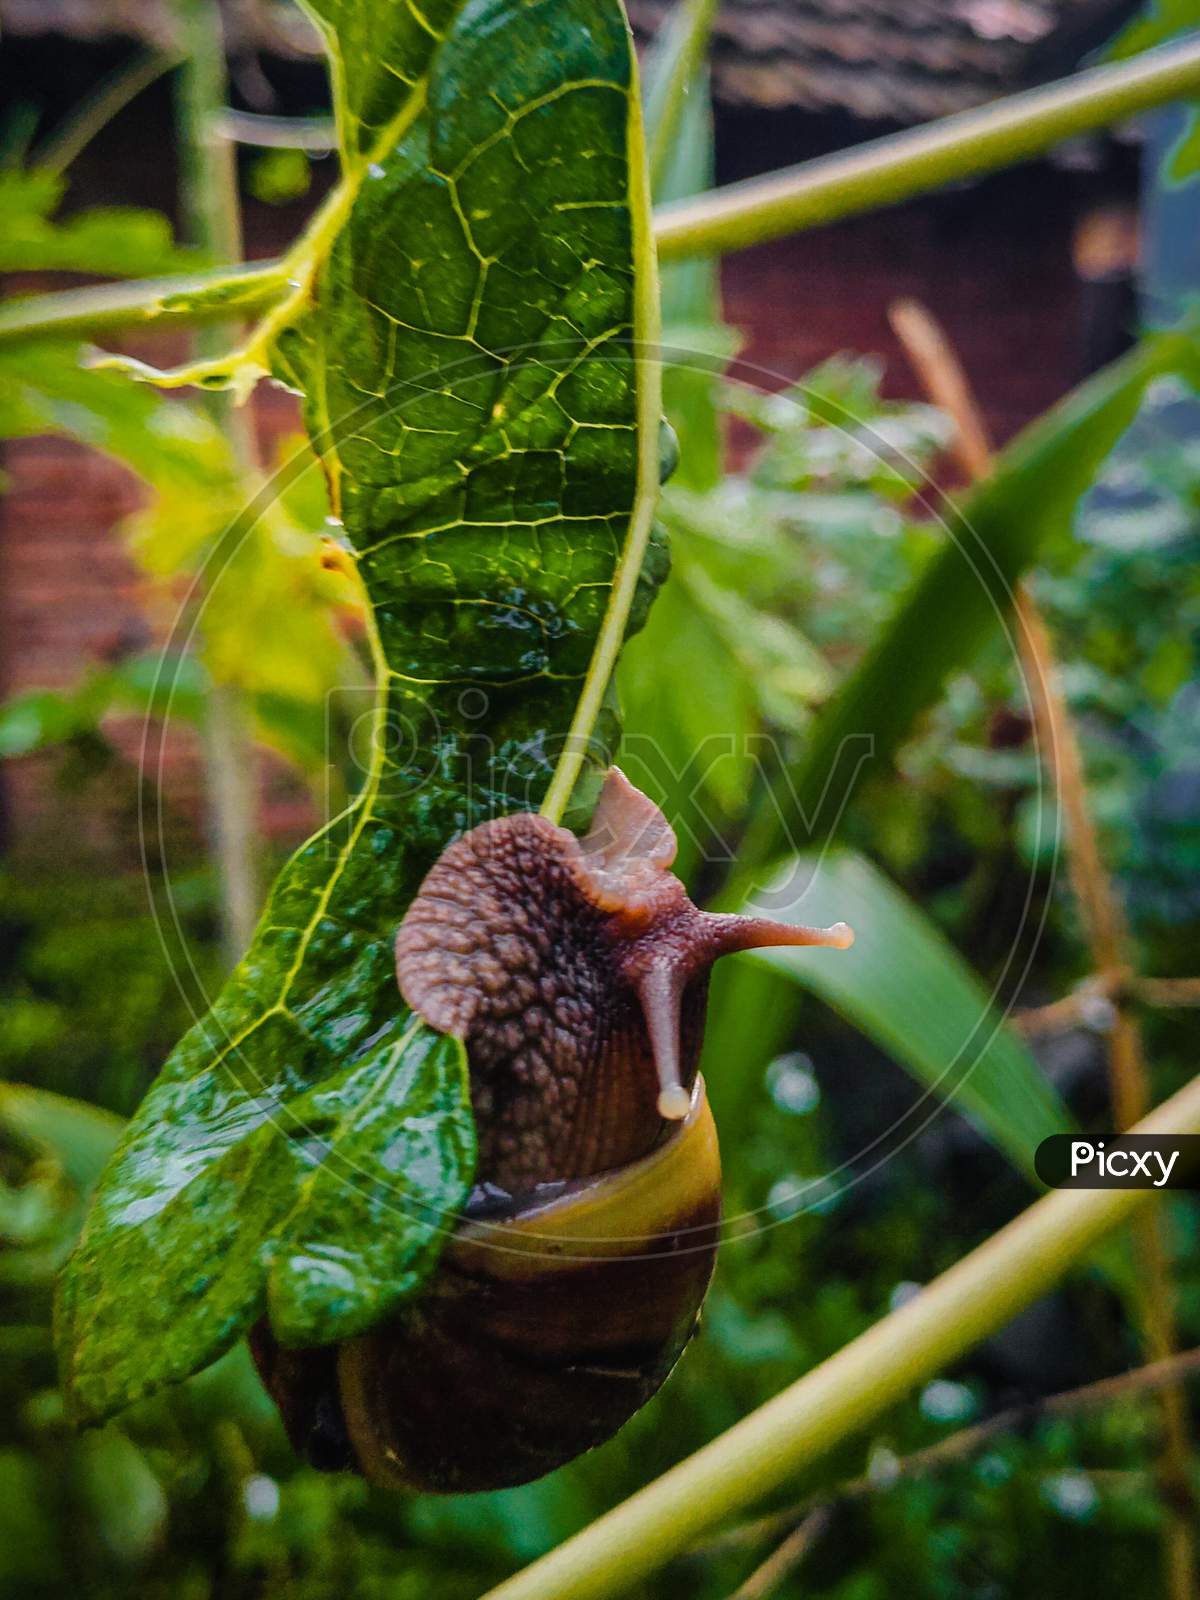 A Snail eating a leaf with selective focus and background blur